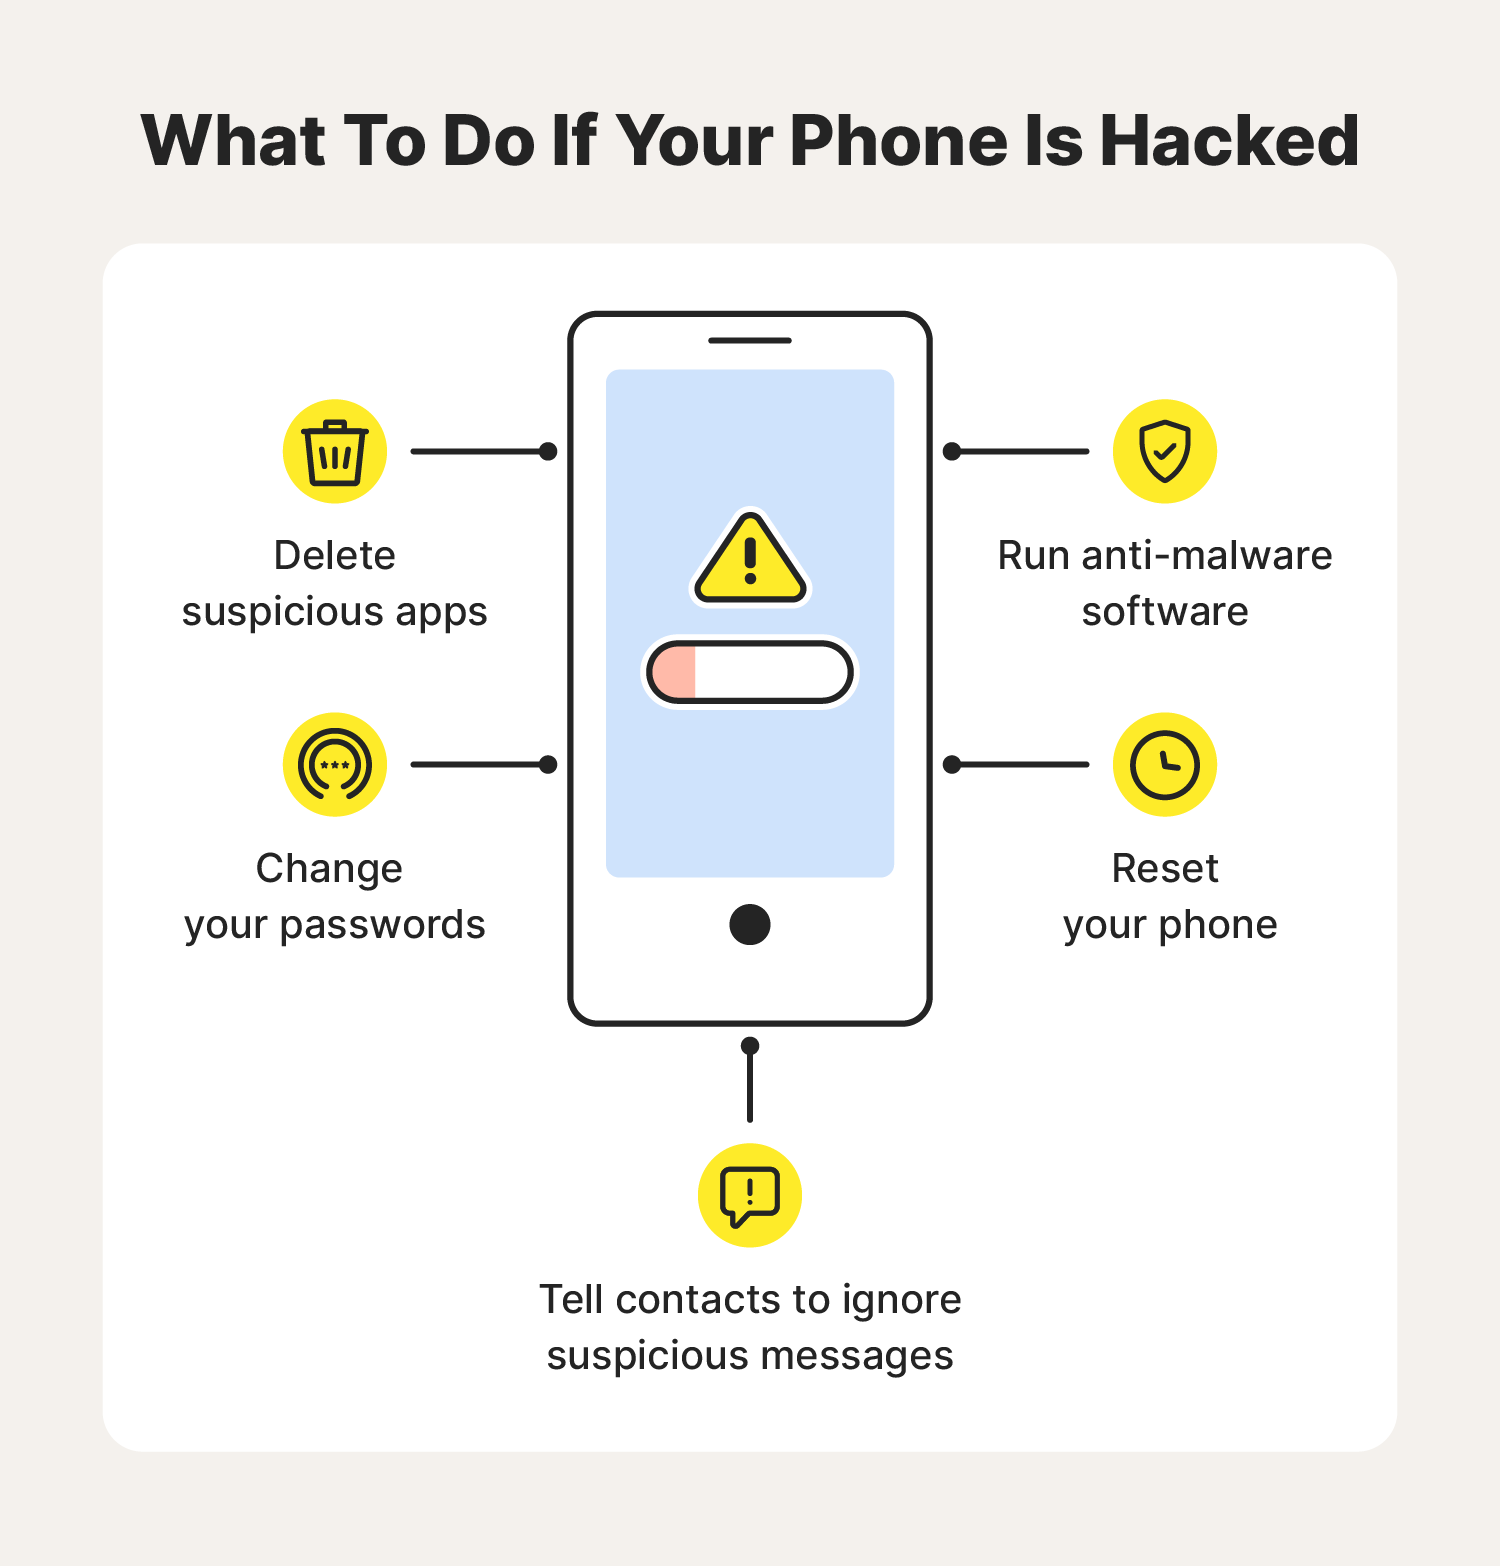 Tips for how to recover after your phone is hacked.